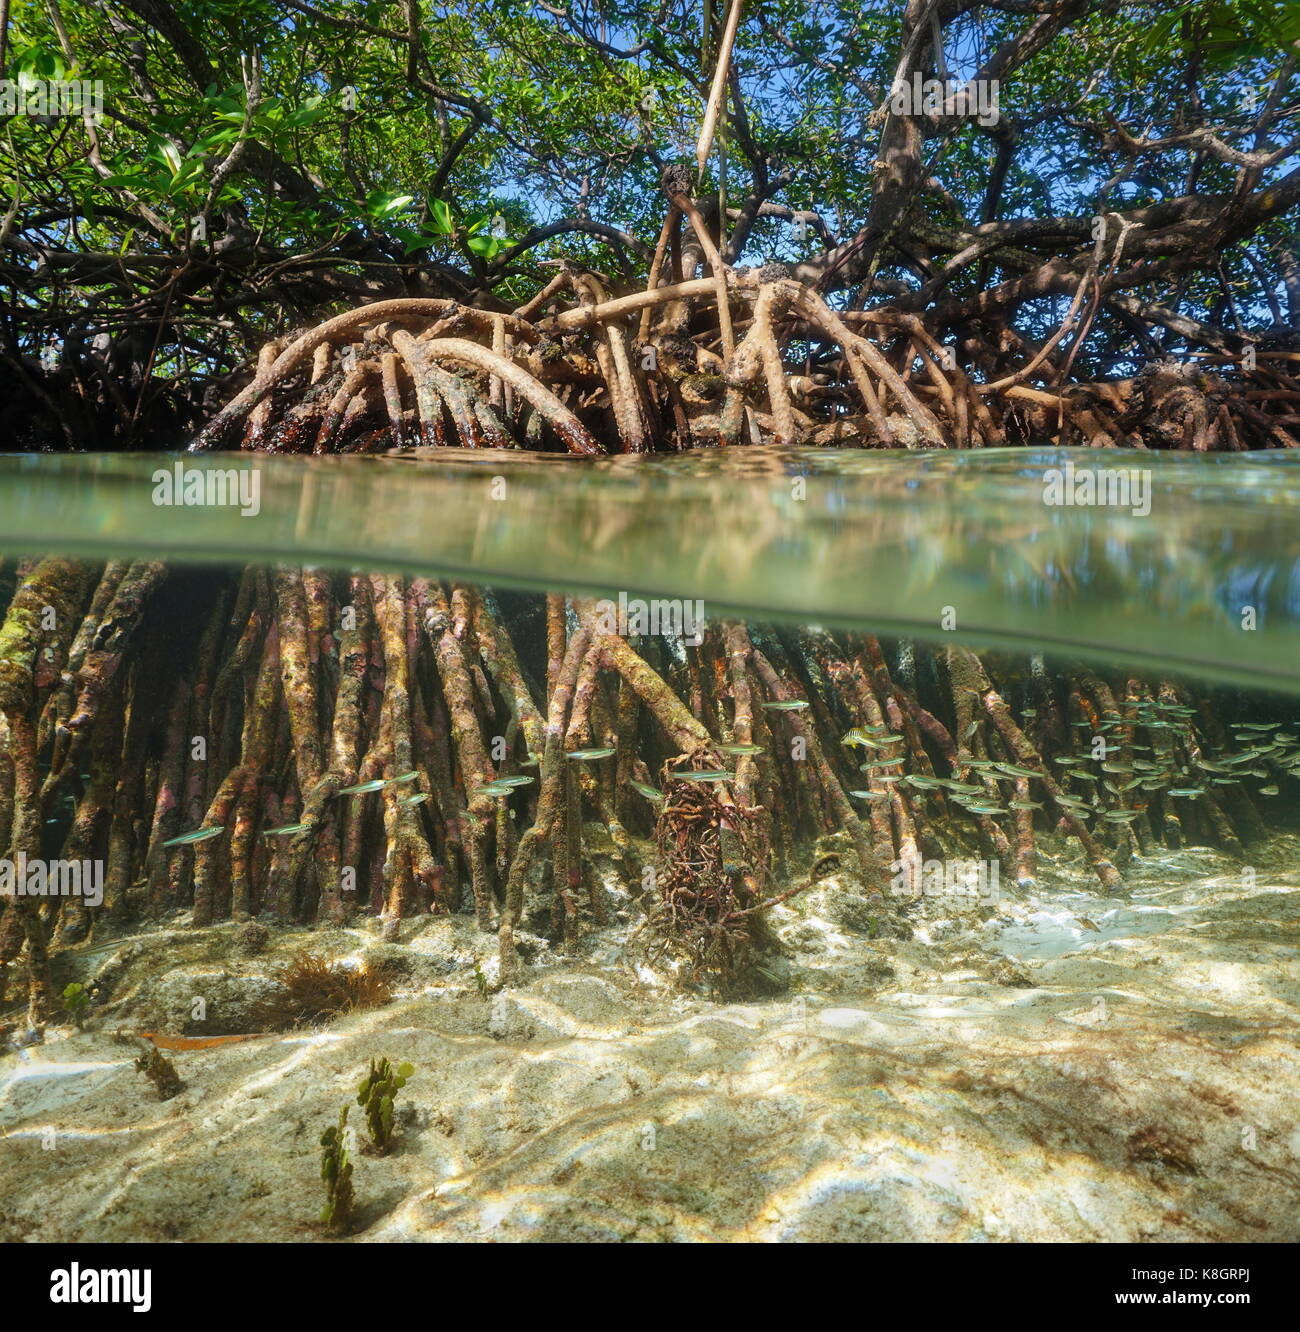 Split view of mangrove tree over and under the water surface, Caribbean sea Stock Photo